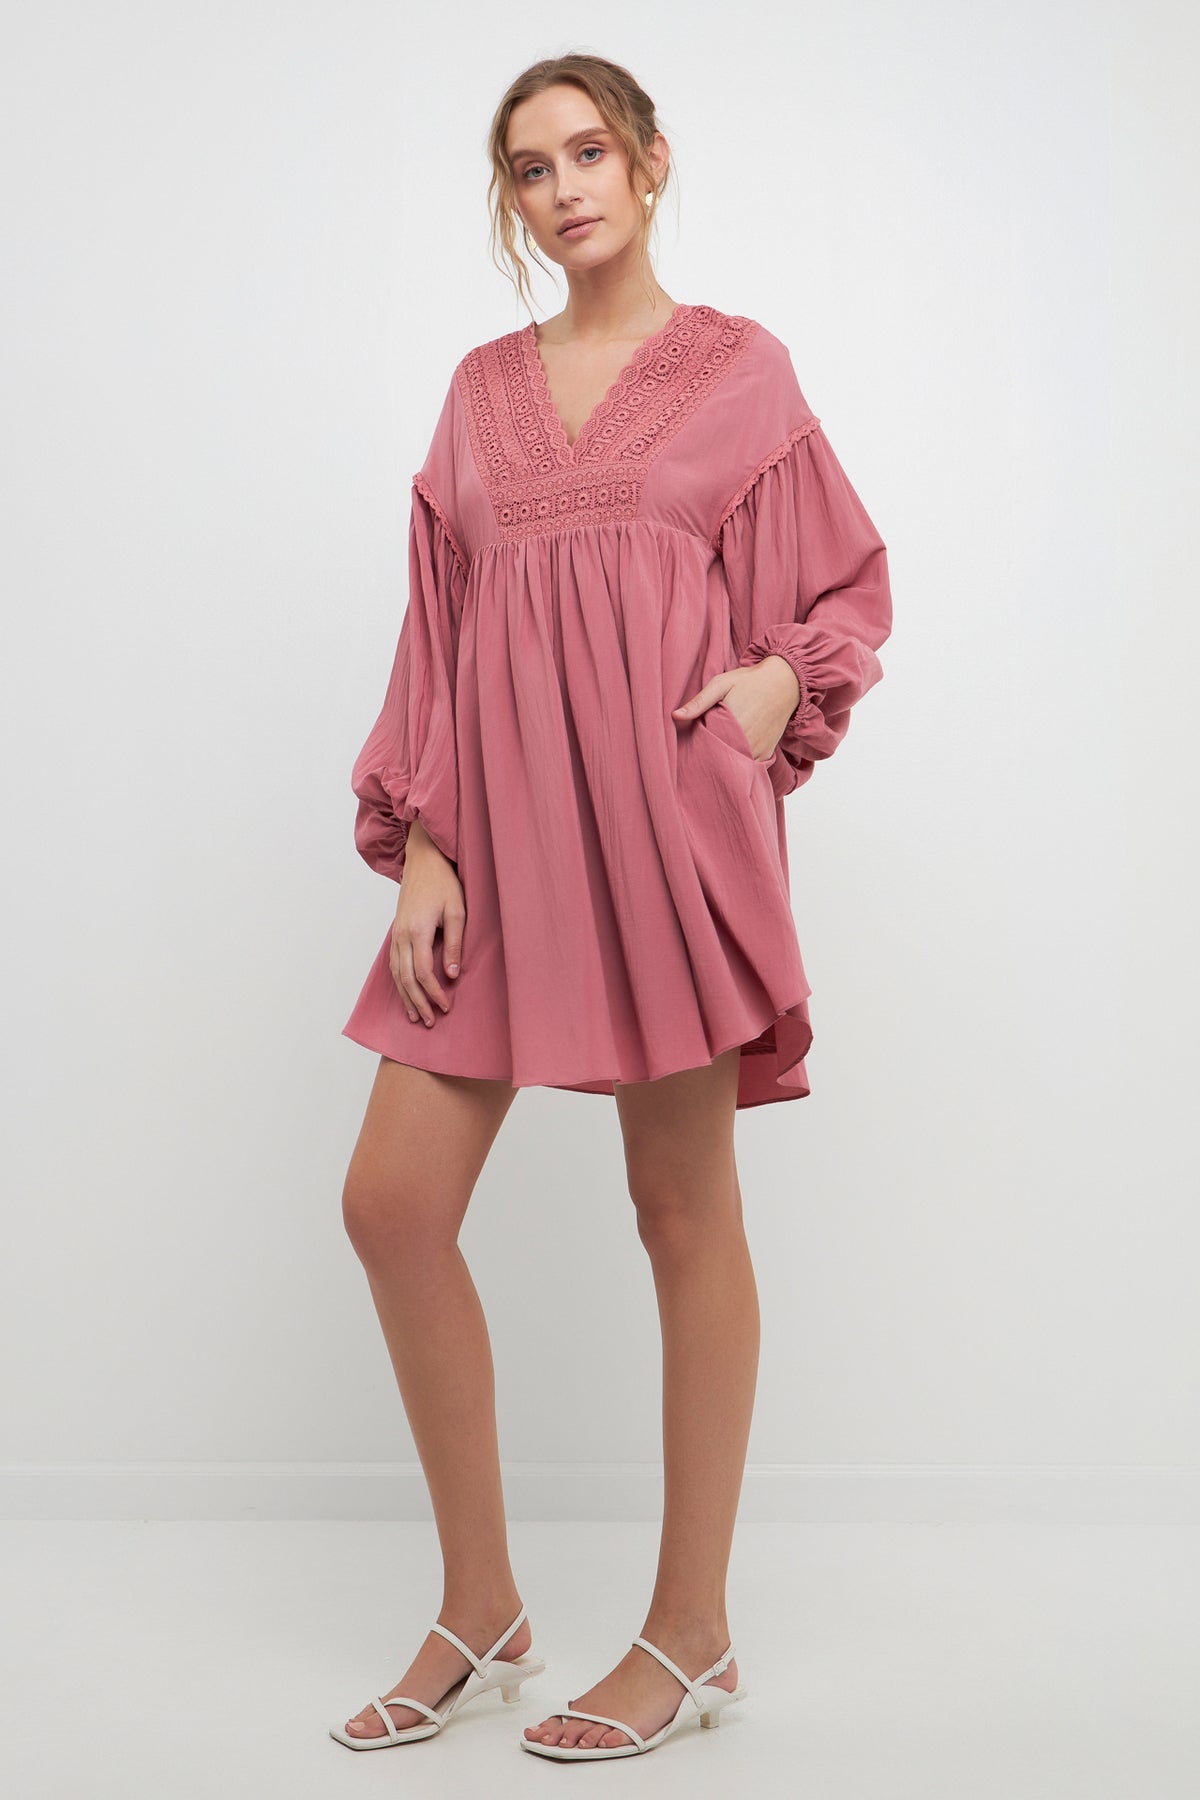 FREE THE ROSES - Laced Blouson Sleeve Shift Dress - DRESSES available at Objectrare